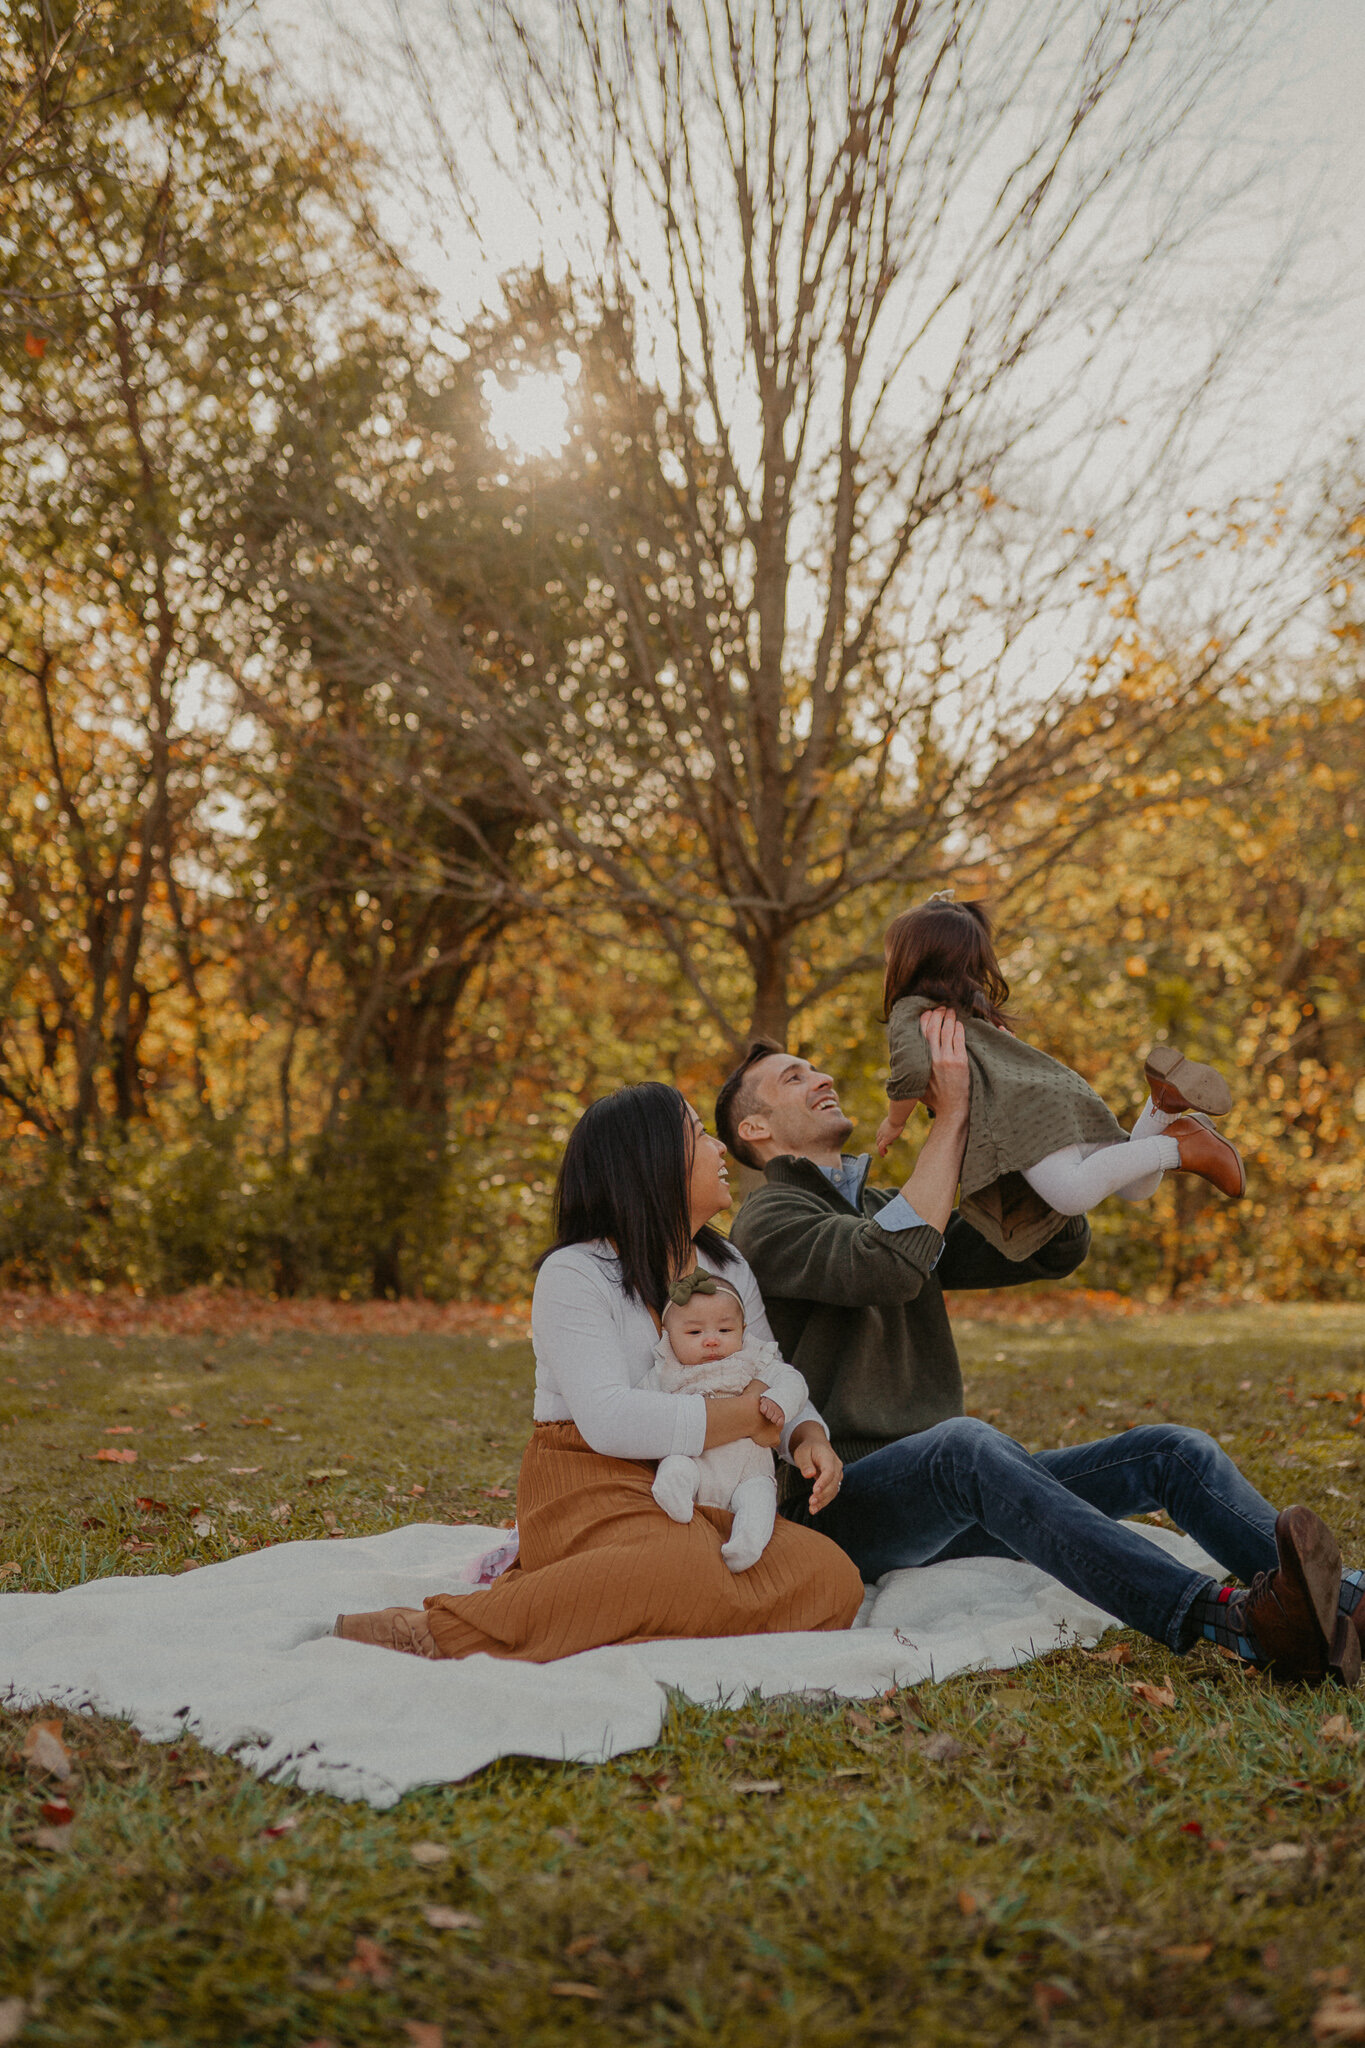 Bettyannphotography-family-couples-fall-midwest-desmoines-iowa-photographer-autum-session25.jpg